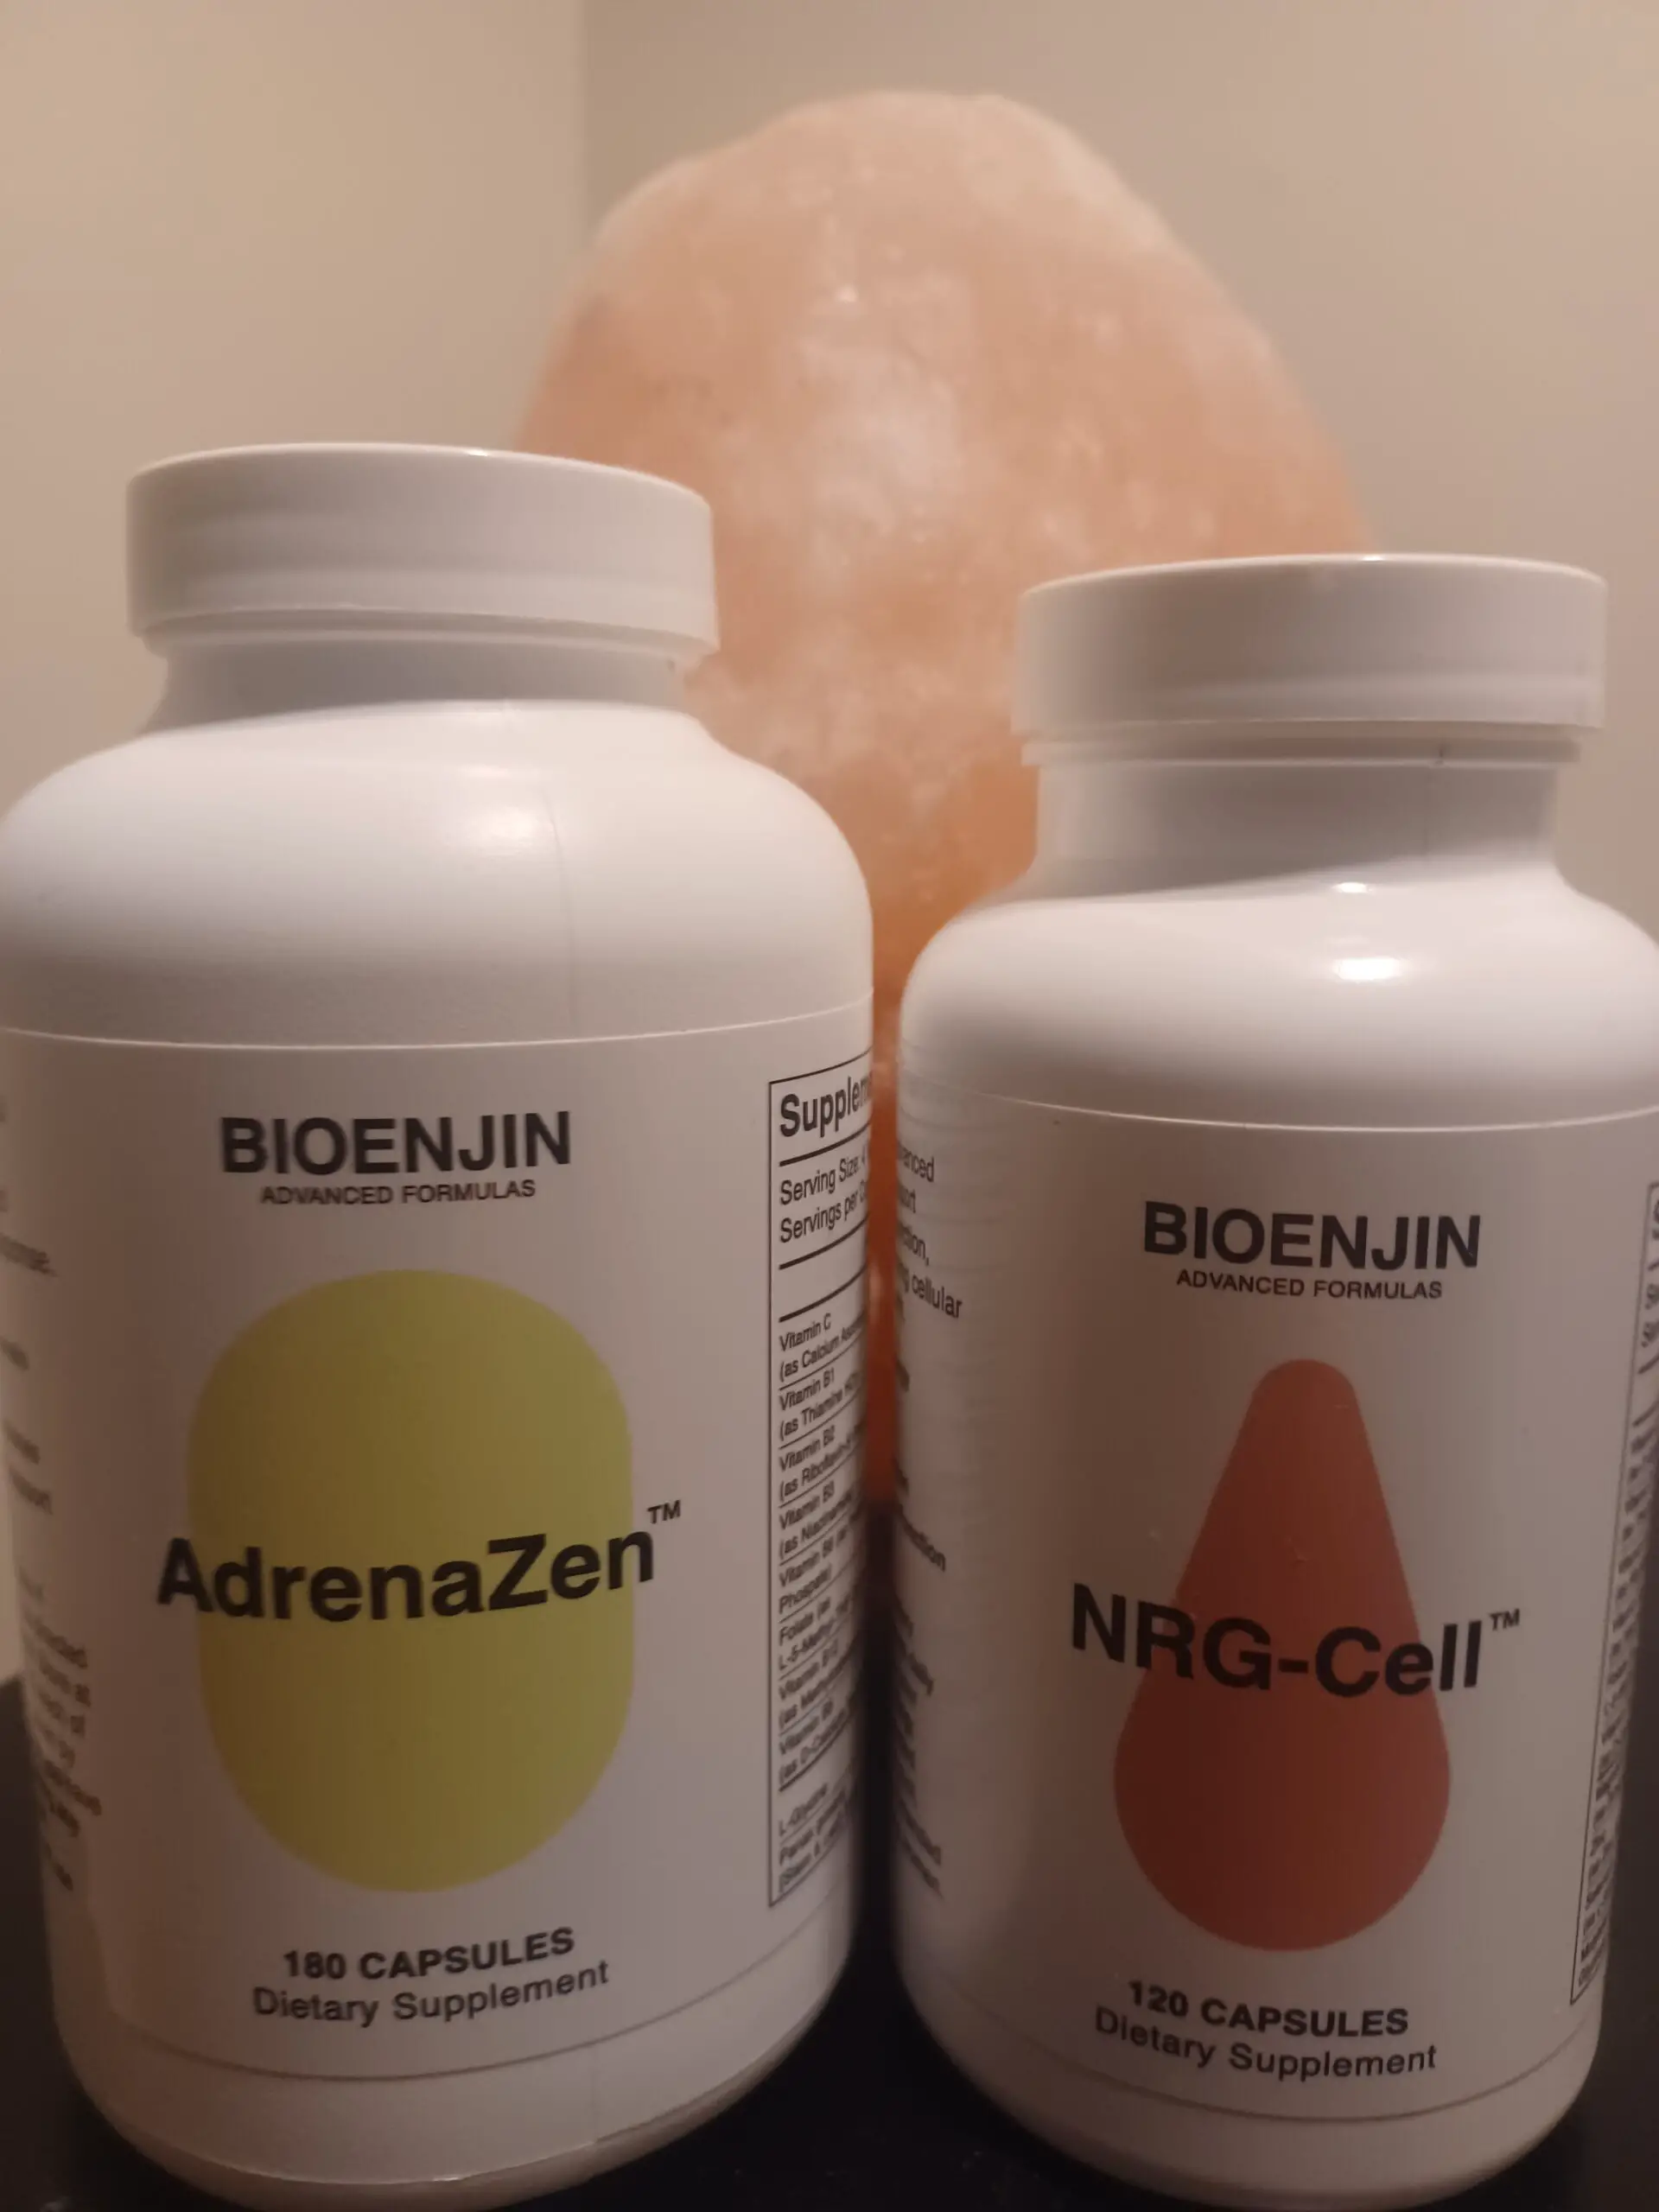 Bioenjin uses the slogan 'Elevating Health Naturally.' The company provides excellent supplements that are rich in vitamins and plant-based extracts and compounds.